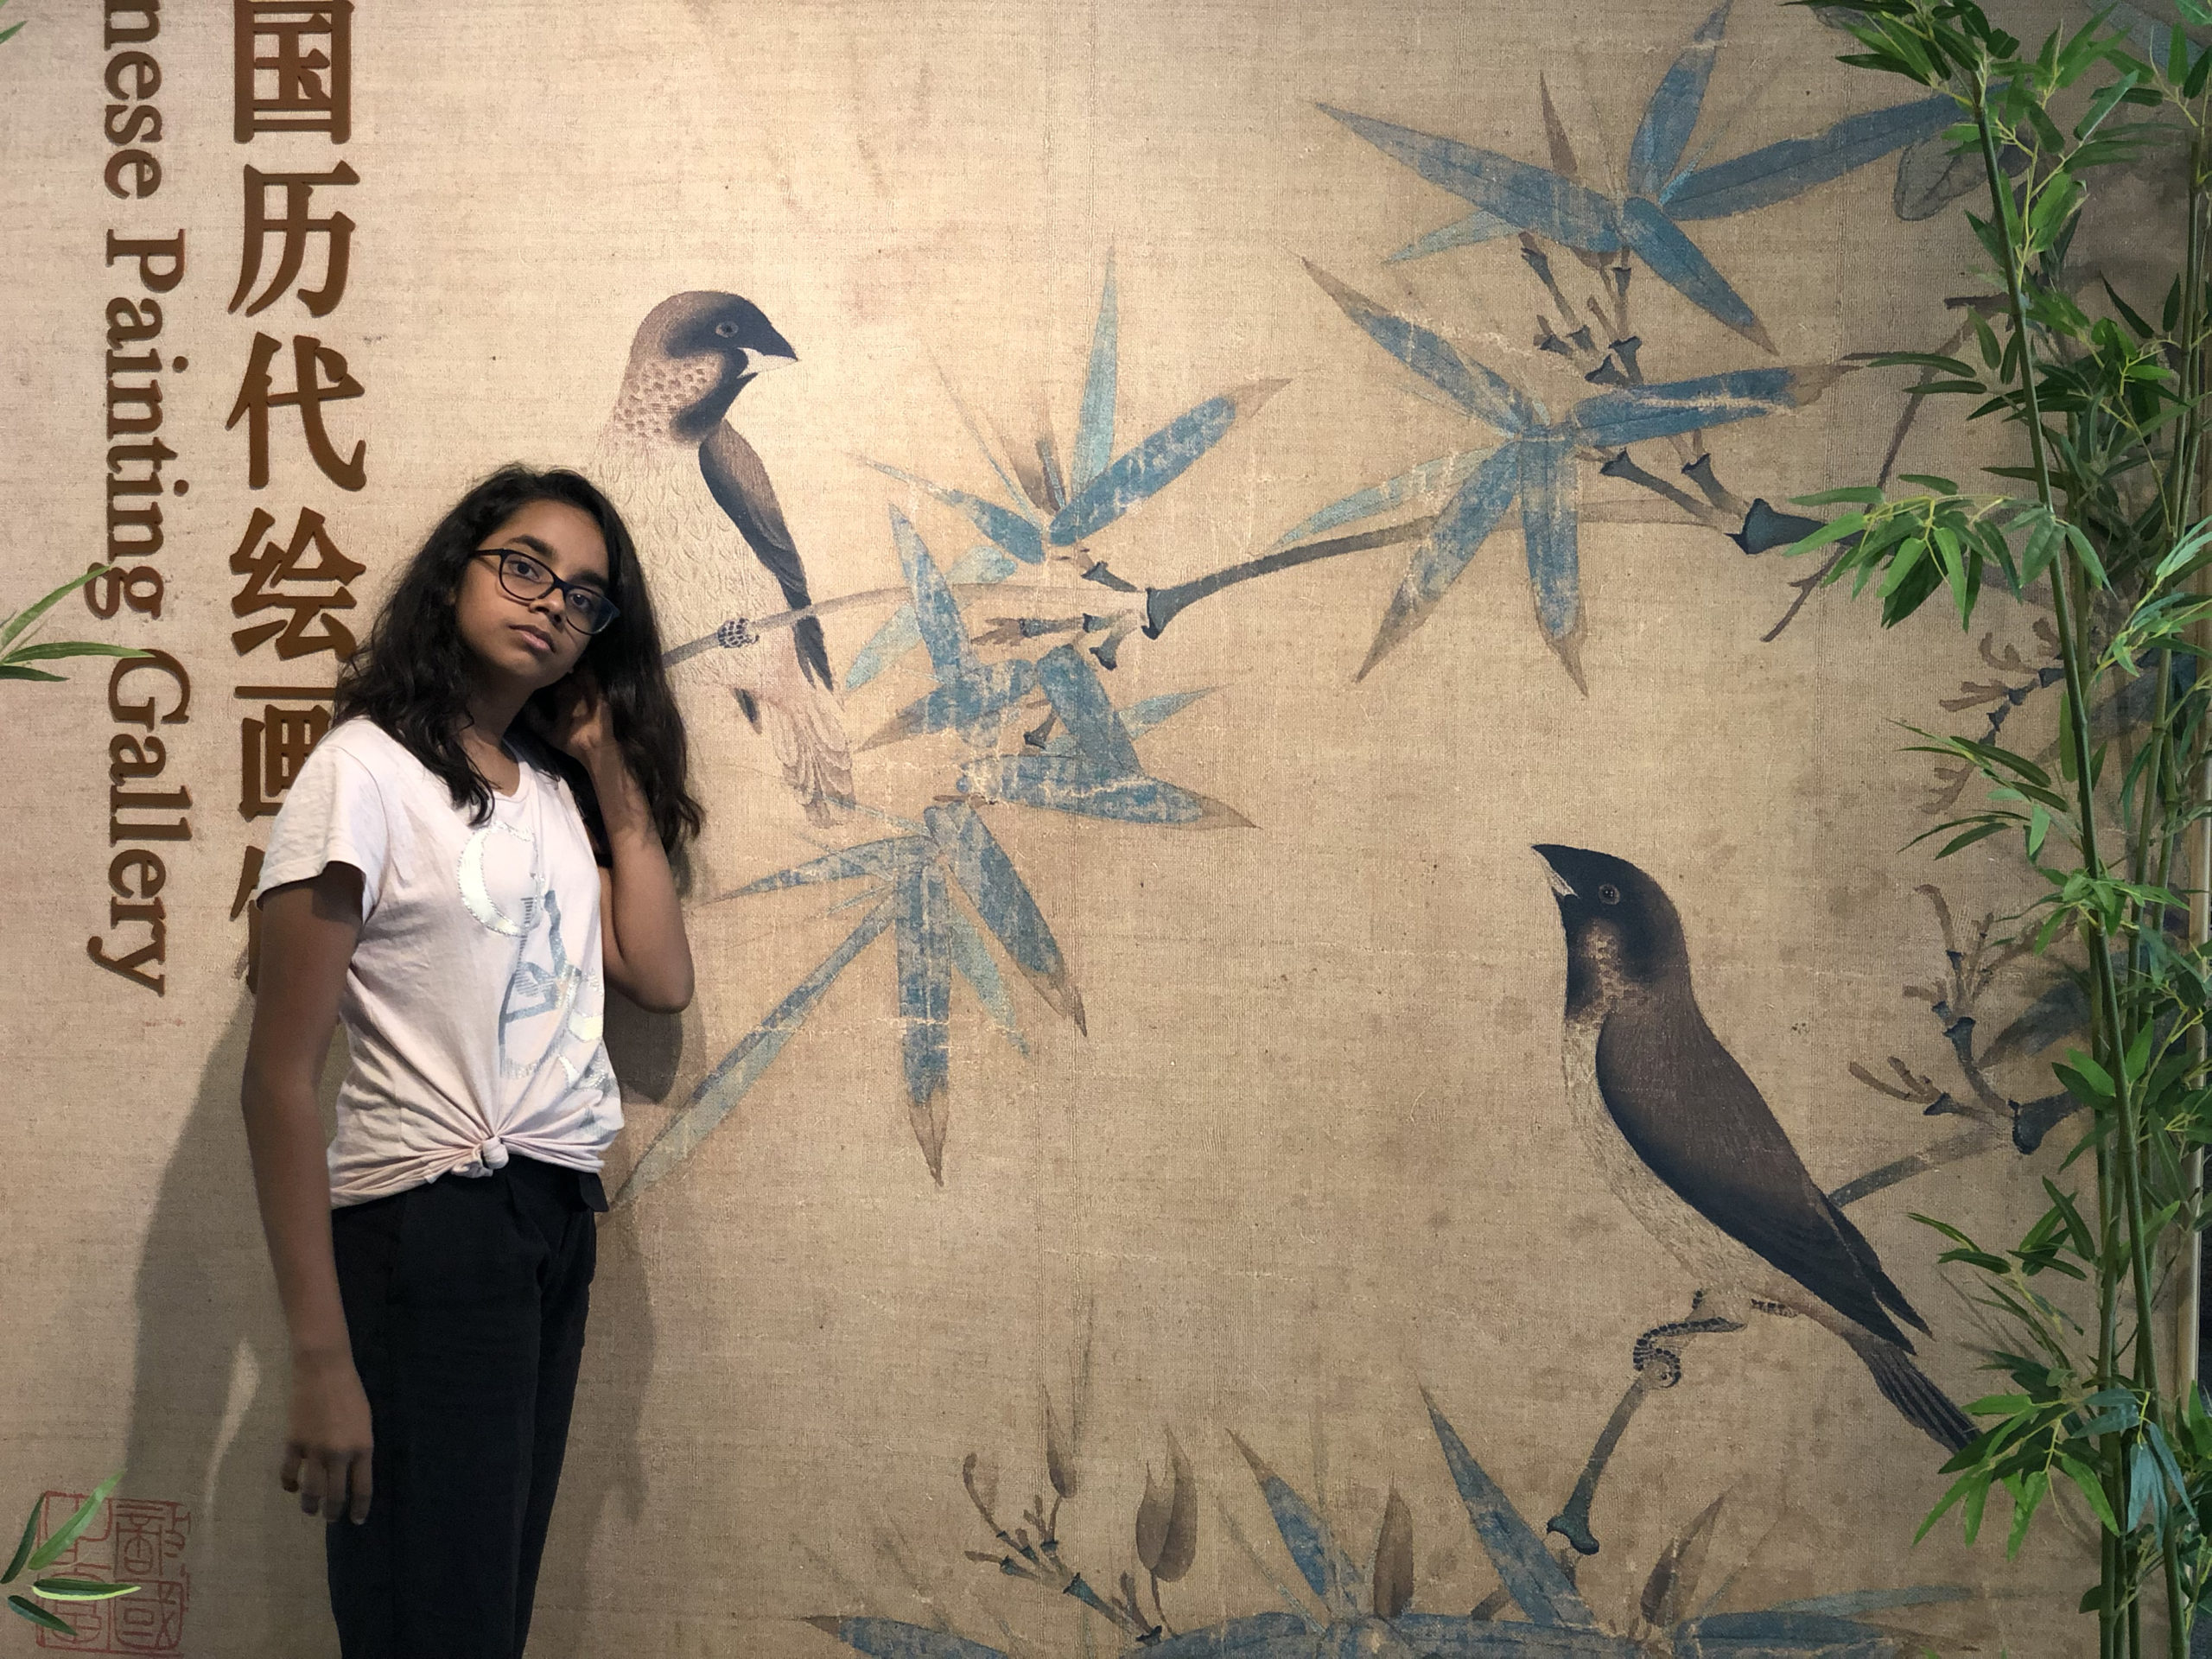 At the entrance of the Chinese painting gallery